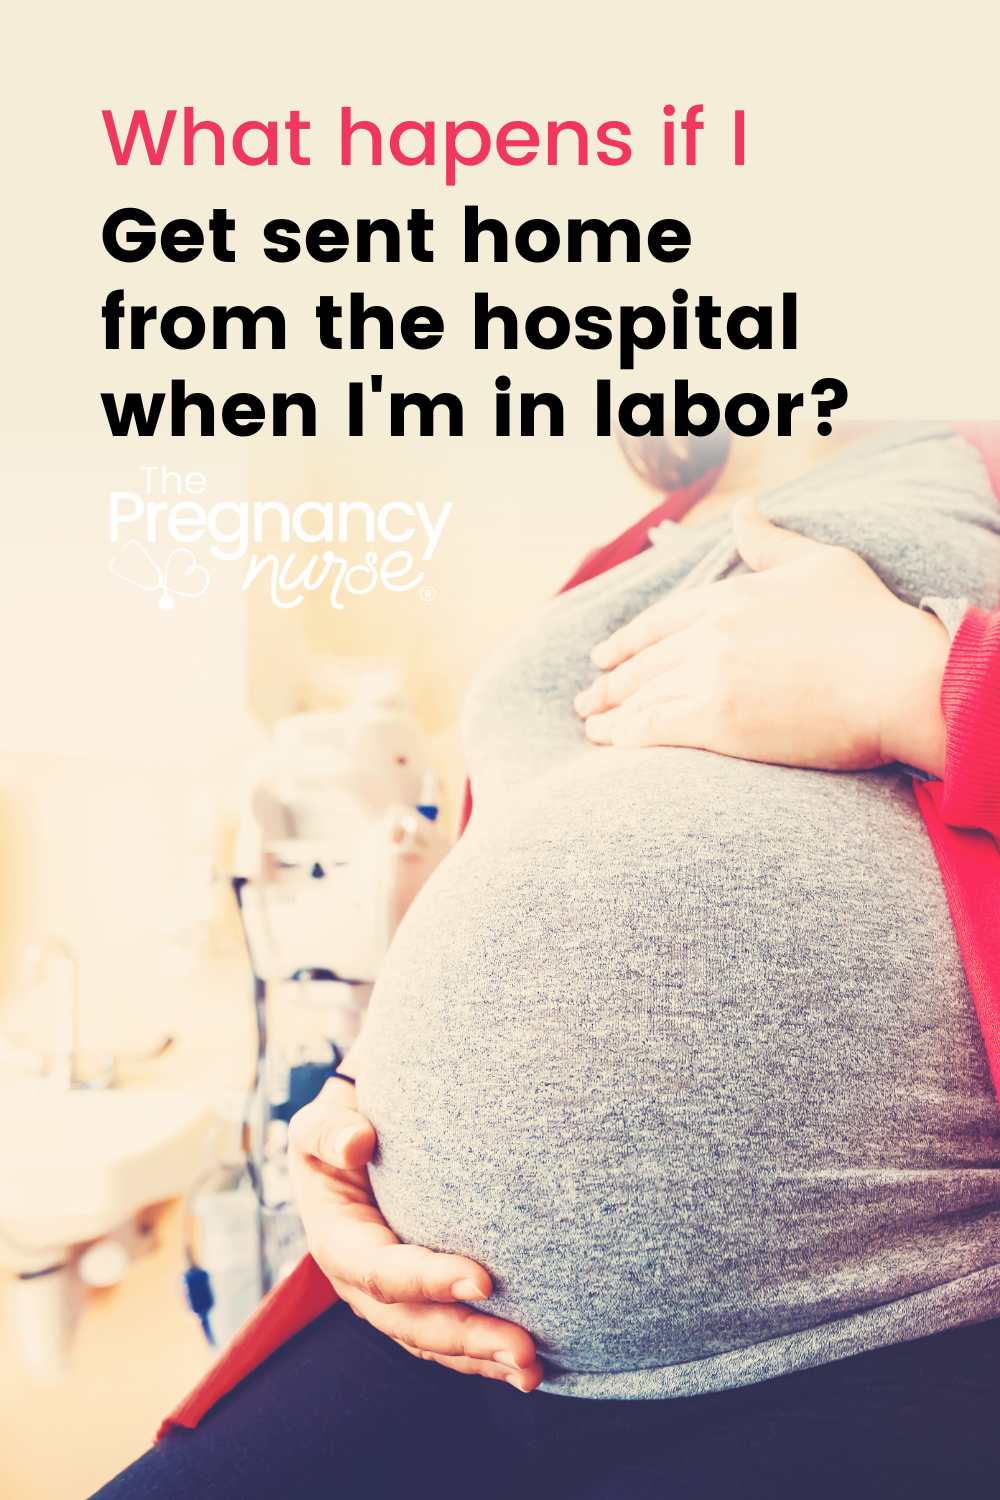 You may be really worried about being sent home from the hospital when you think you're in labor. You might be embarrassed by going for "no reason" or just the hassle of going there without the outcome that you want. All of those are normal, and I want you to know what to expect in this situation!